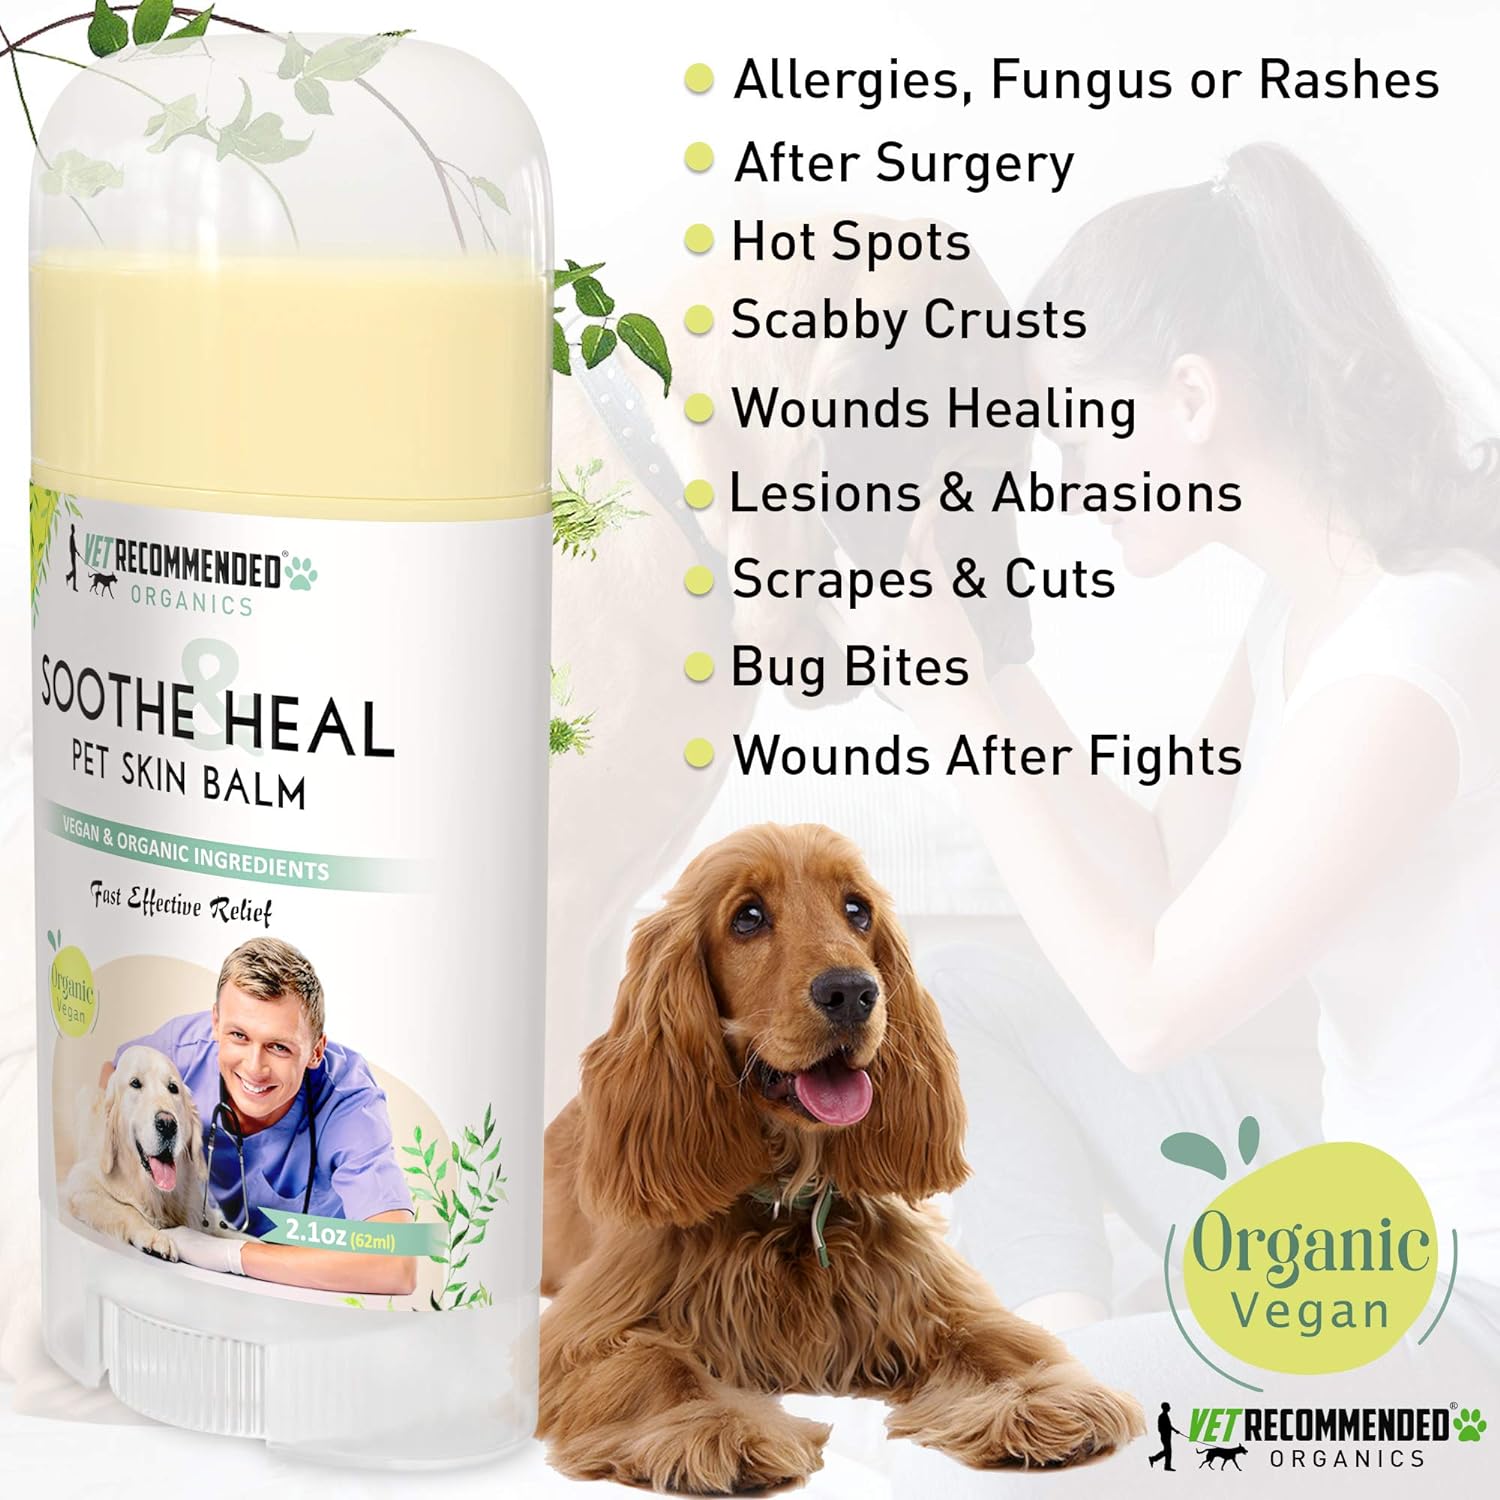 Soothe & Heal Balm for Dogs and Cats (2.1oz) - Organic and Vegan Ingredients to Relieve Skin Irritations Fast. Natural Hot Spot Treatment for Dry Itchy Skin. All Skin, Snout and Paws. USA Made : Pet Supplies